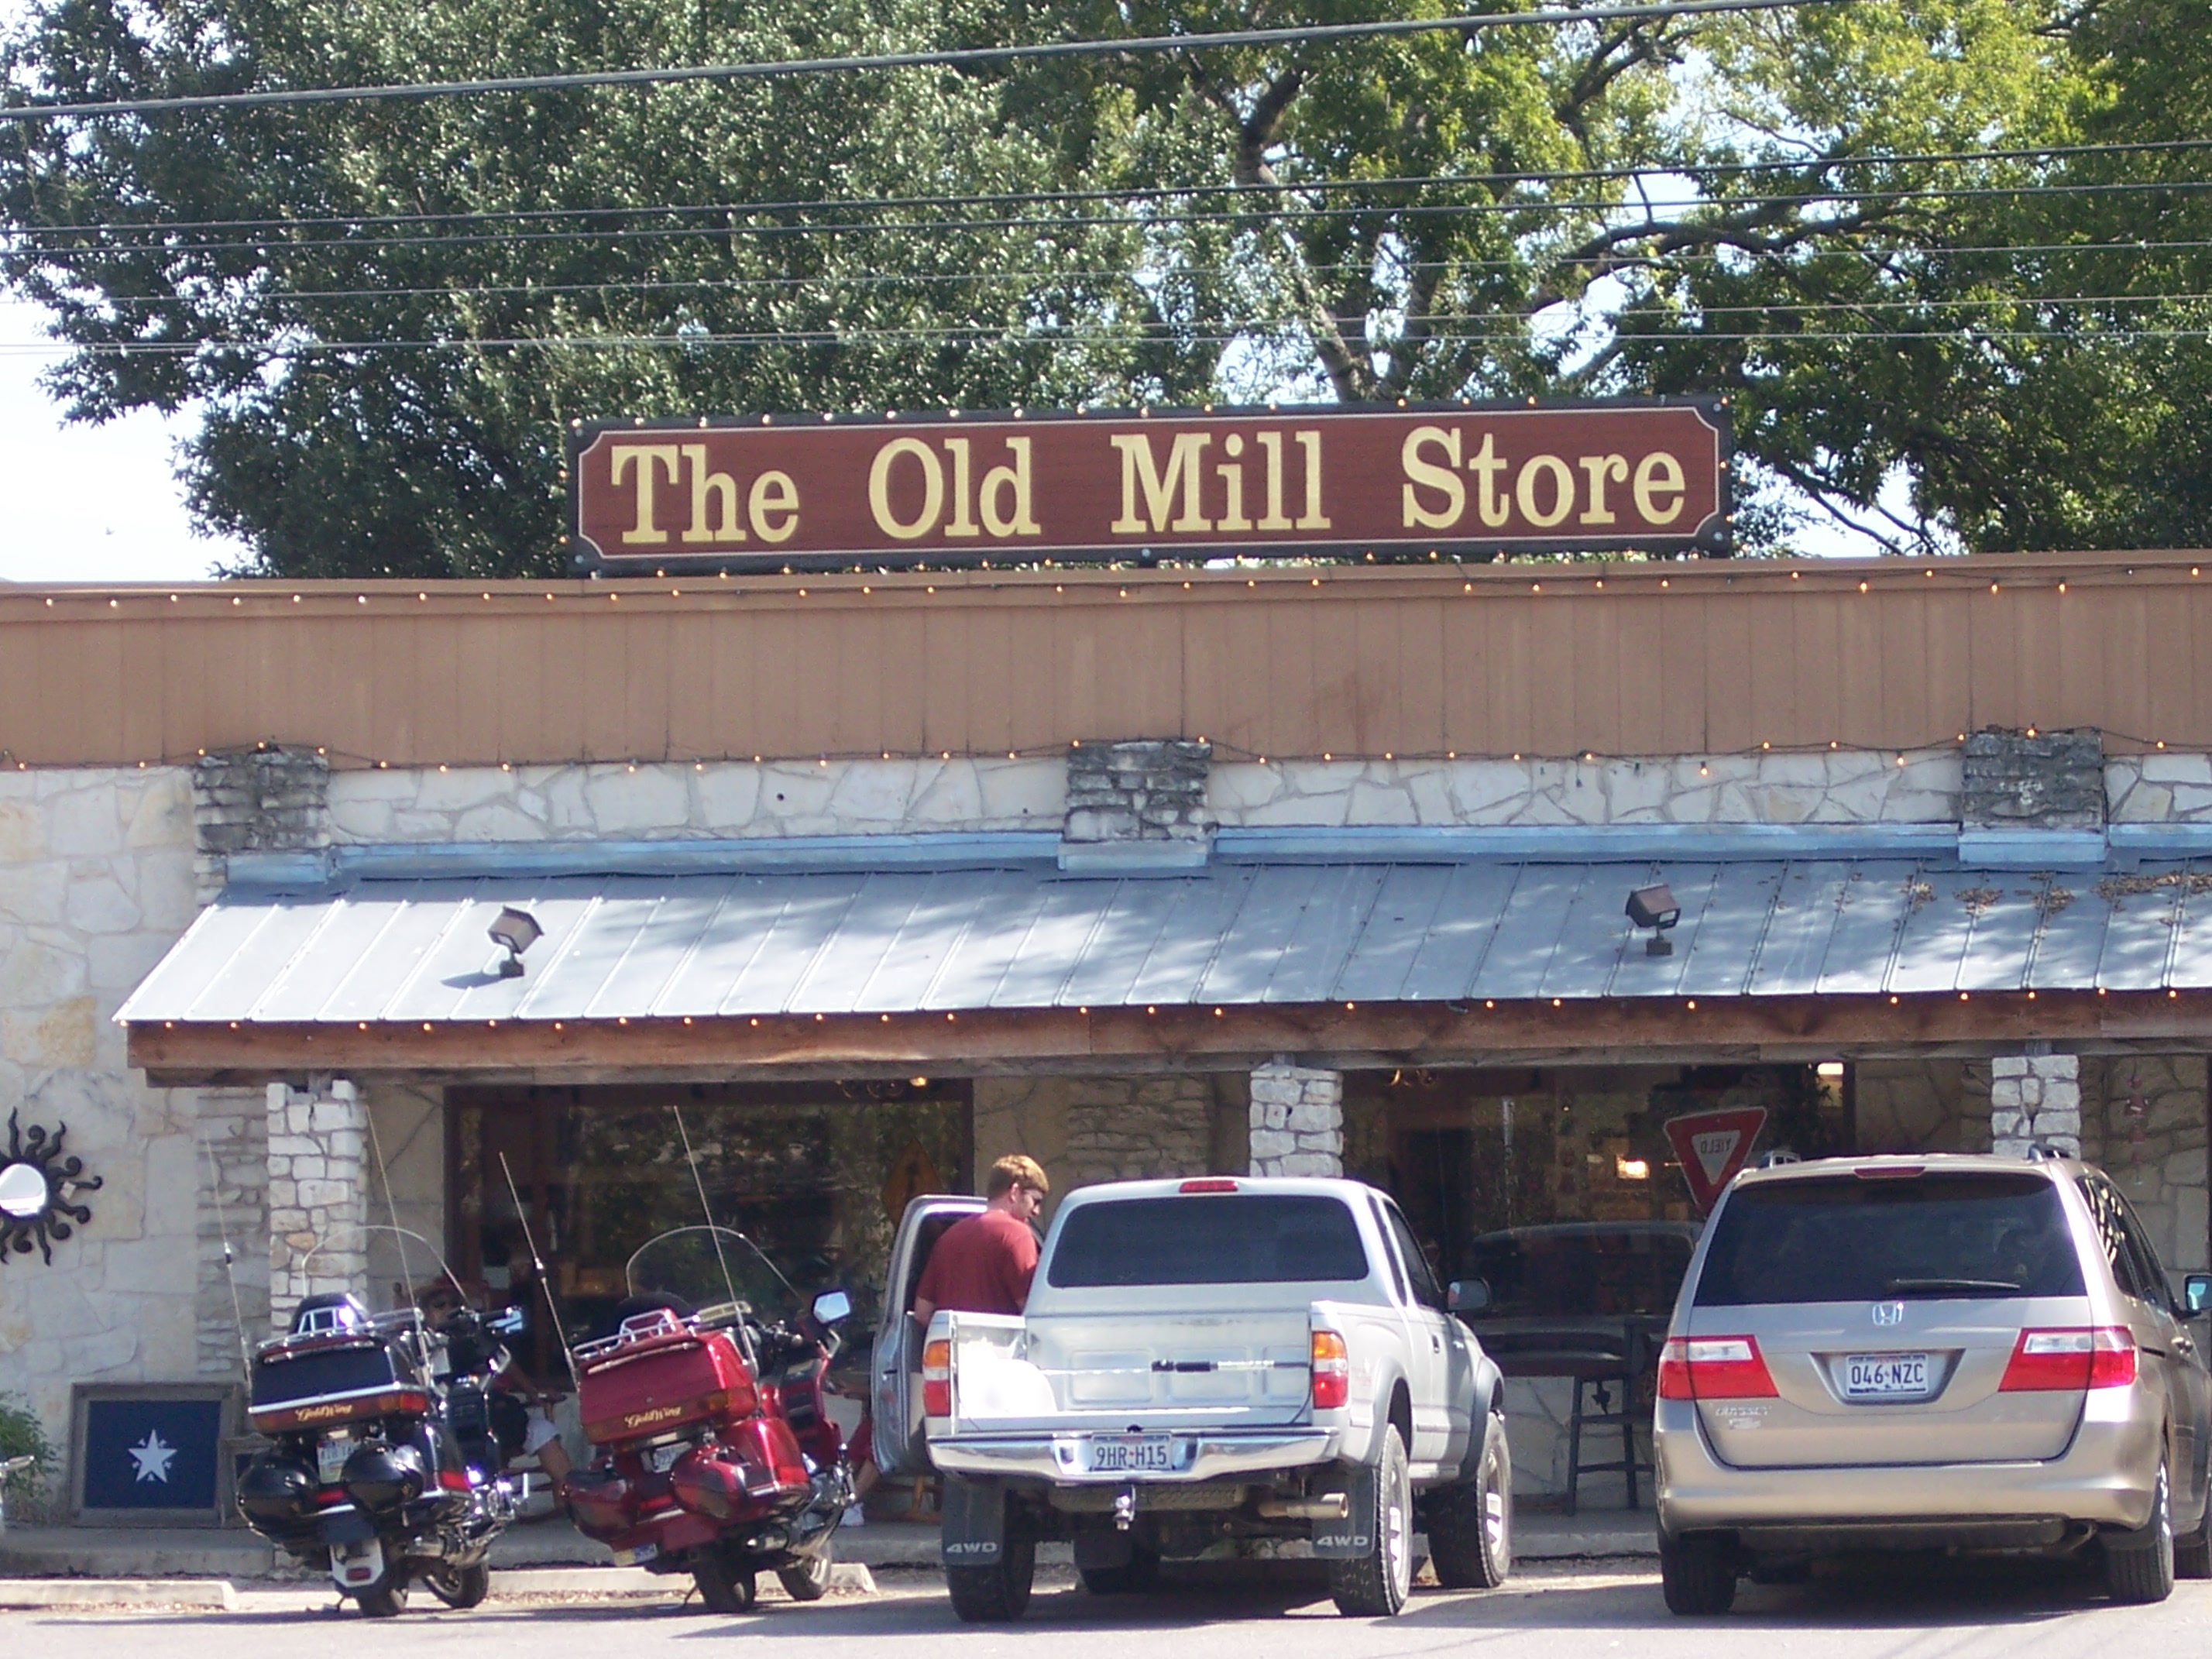  The Old Mill Store 2006